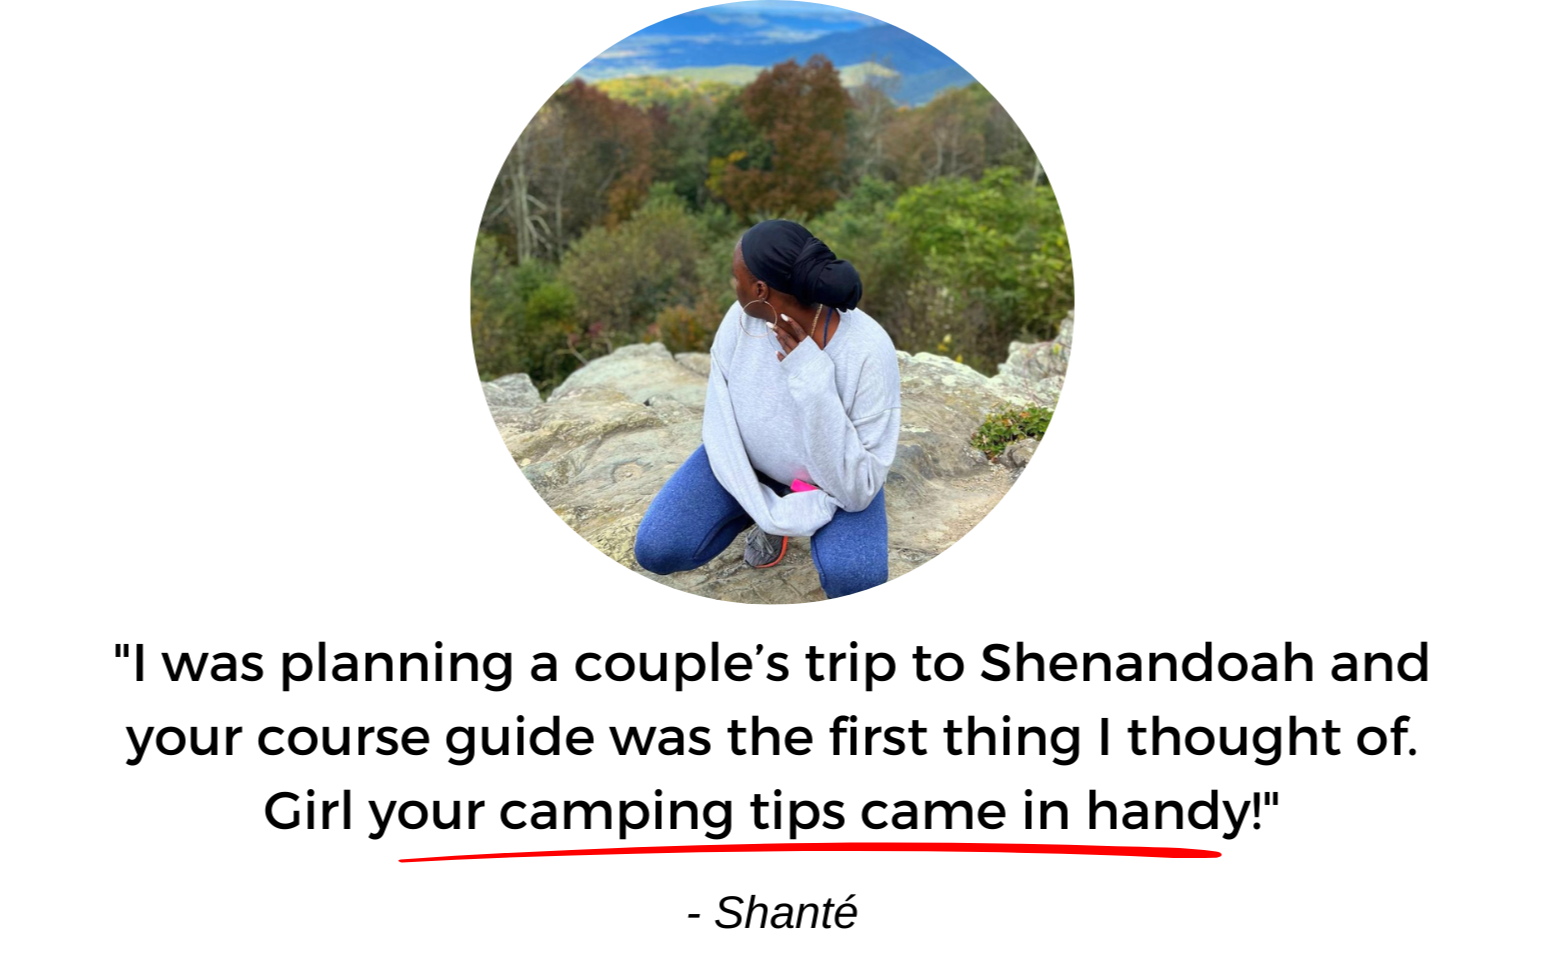 i was planning a couples trip to Shenandoah and your course guide was the first thing i thought of. girl your camping tips came in handy!